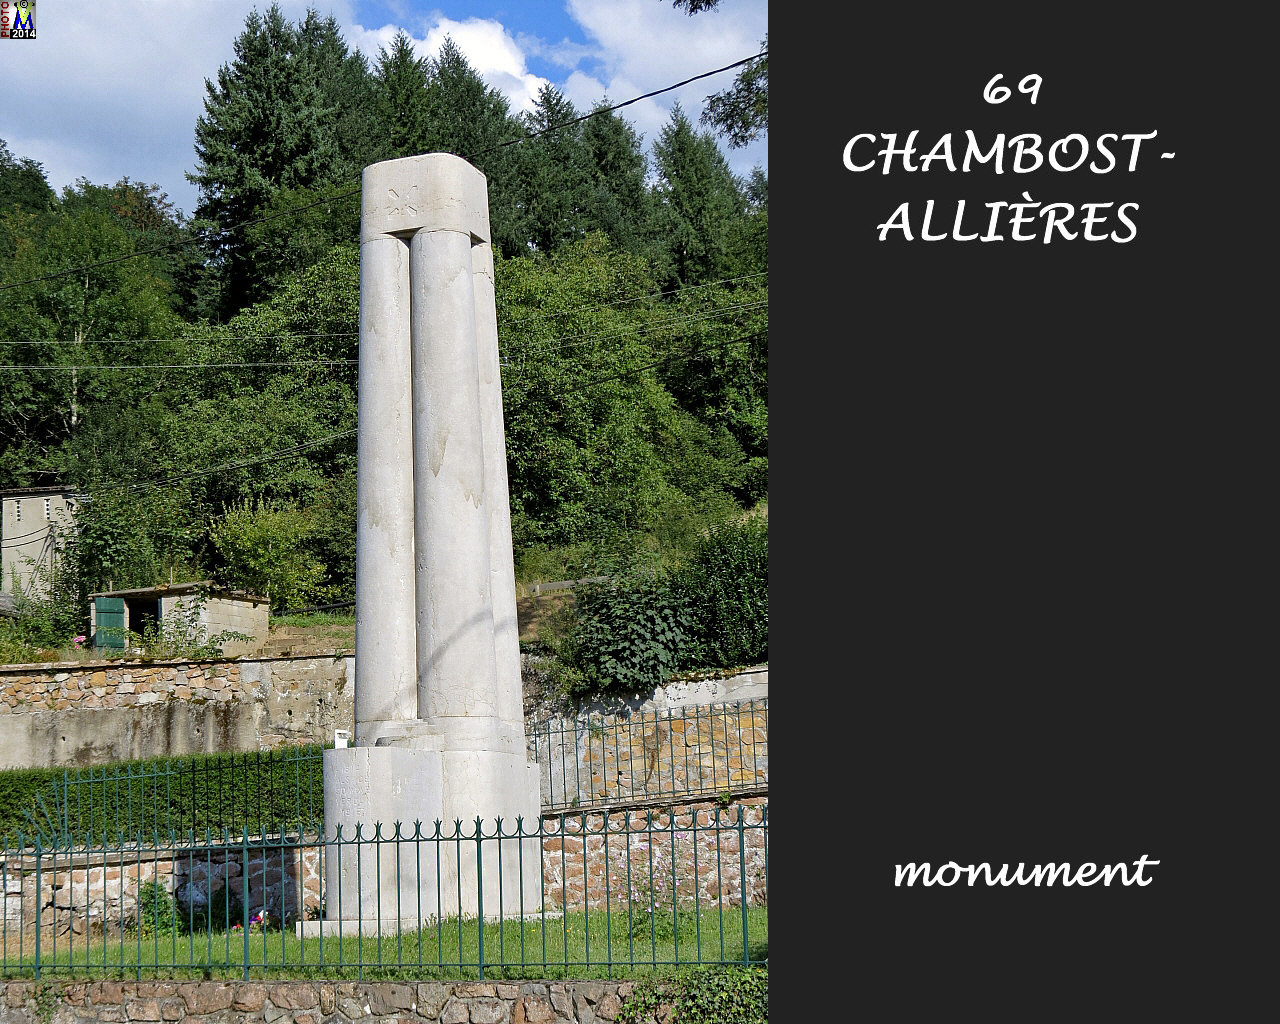 69CHAMBOST-ALLIERES_monument_100.jpg